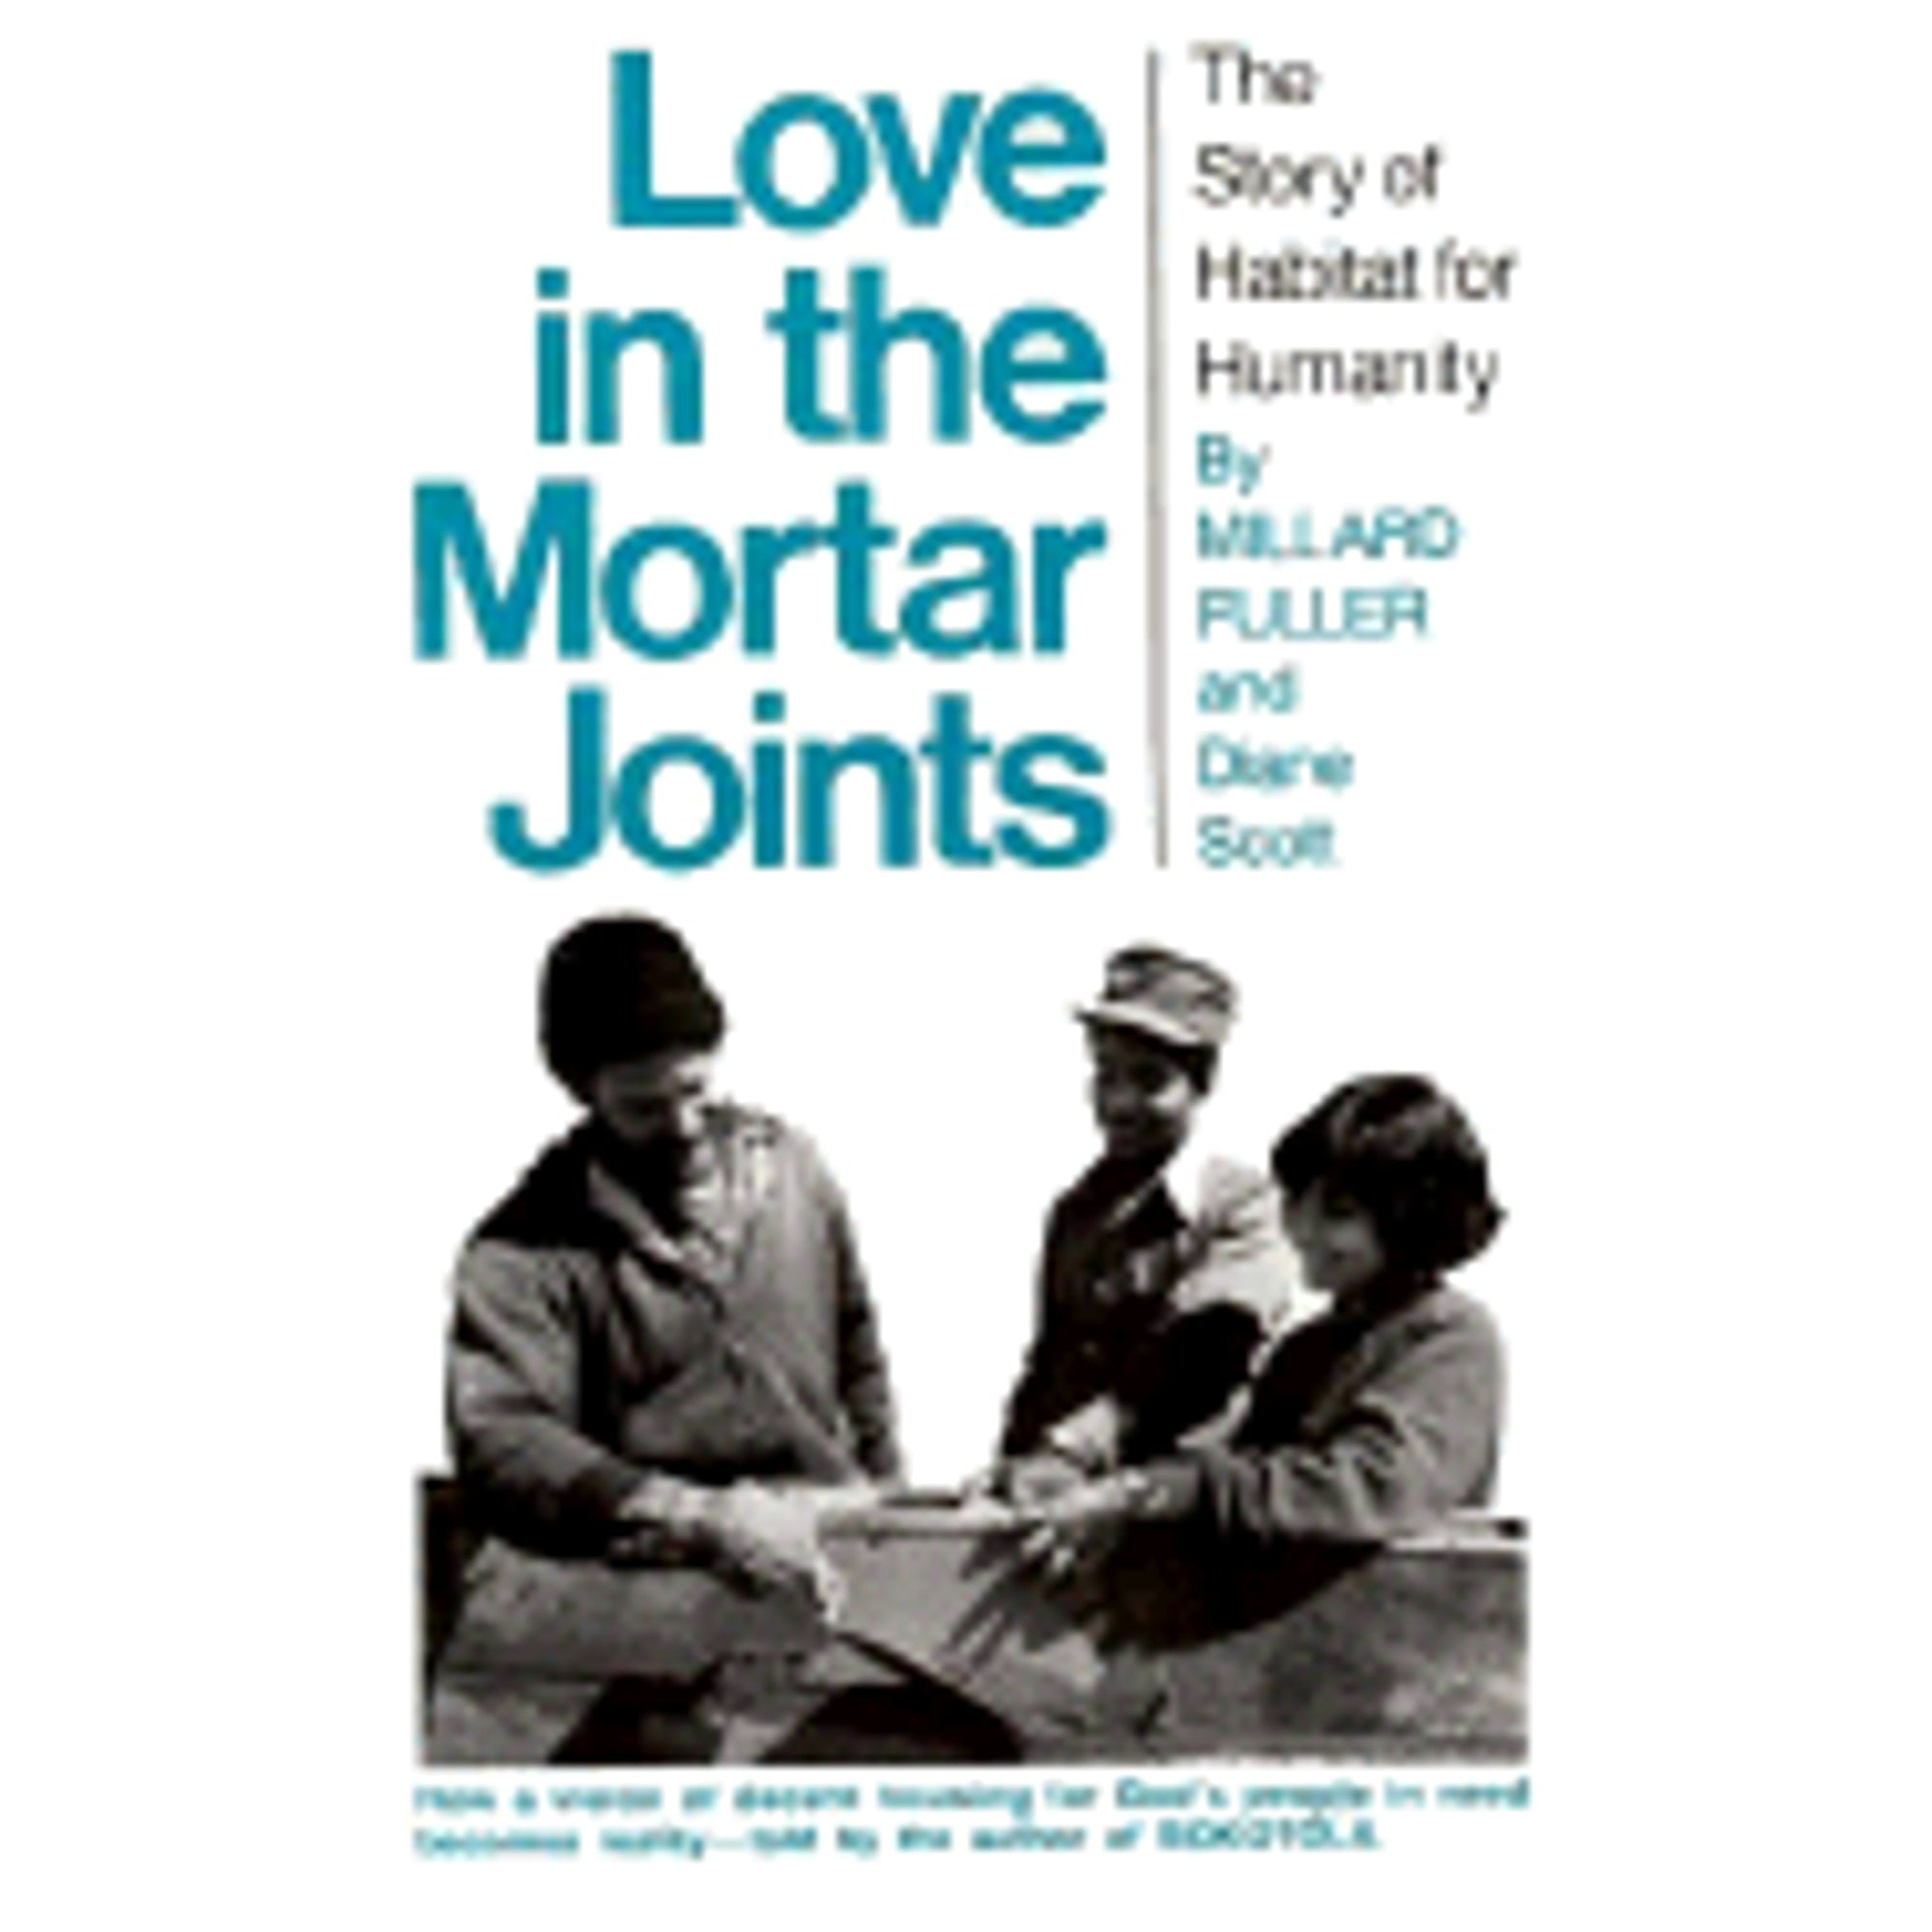 Pre-Owned Love in the Mortar Joints: The Story of Habitat for Humanity (Paperback 9780832914447) by Millard Fuller, Diane Scott